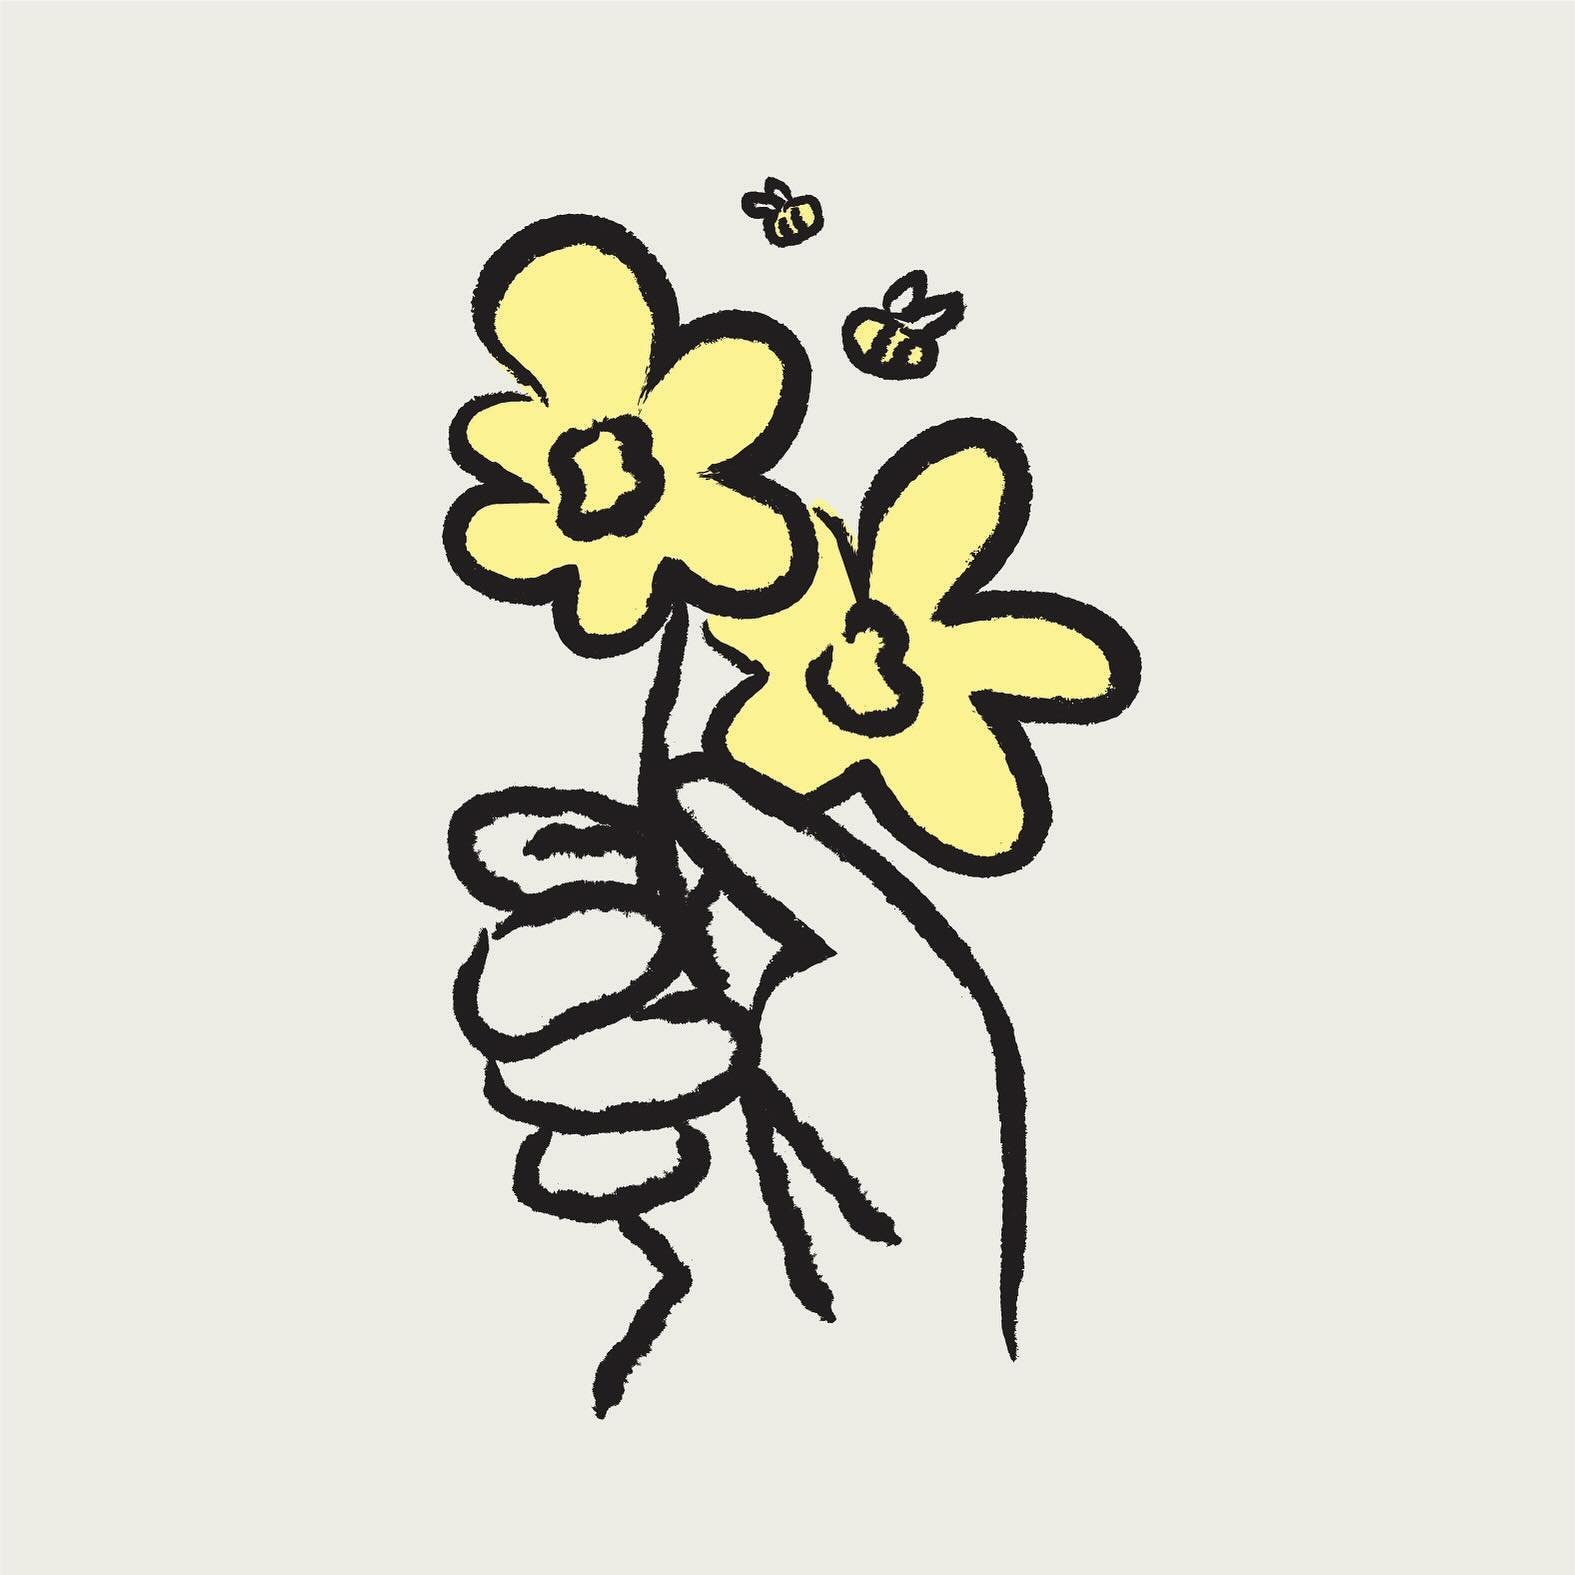 Hello, May! It&rsquo;s been a minute since our last check in together, but I can assure you I&rsquo;ve been a busy bee over here. Popping in to share a fun little illustration whipped up for @candobicycleshop 

I hope you all are soaking up this beau